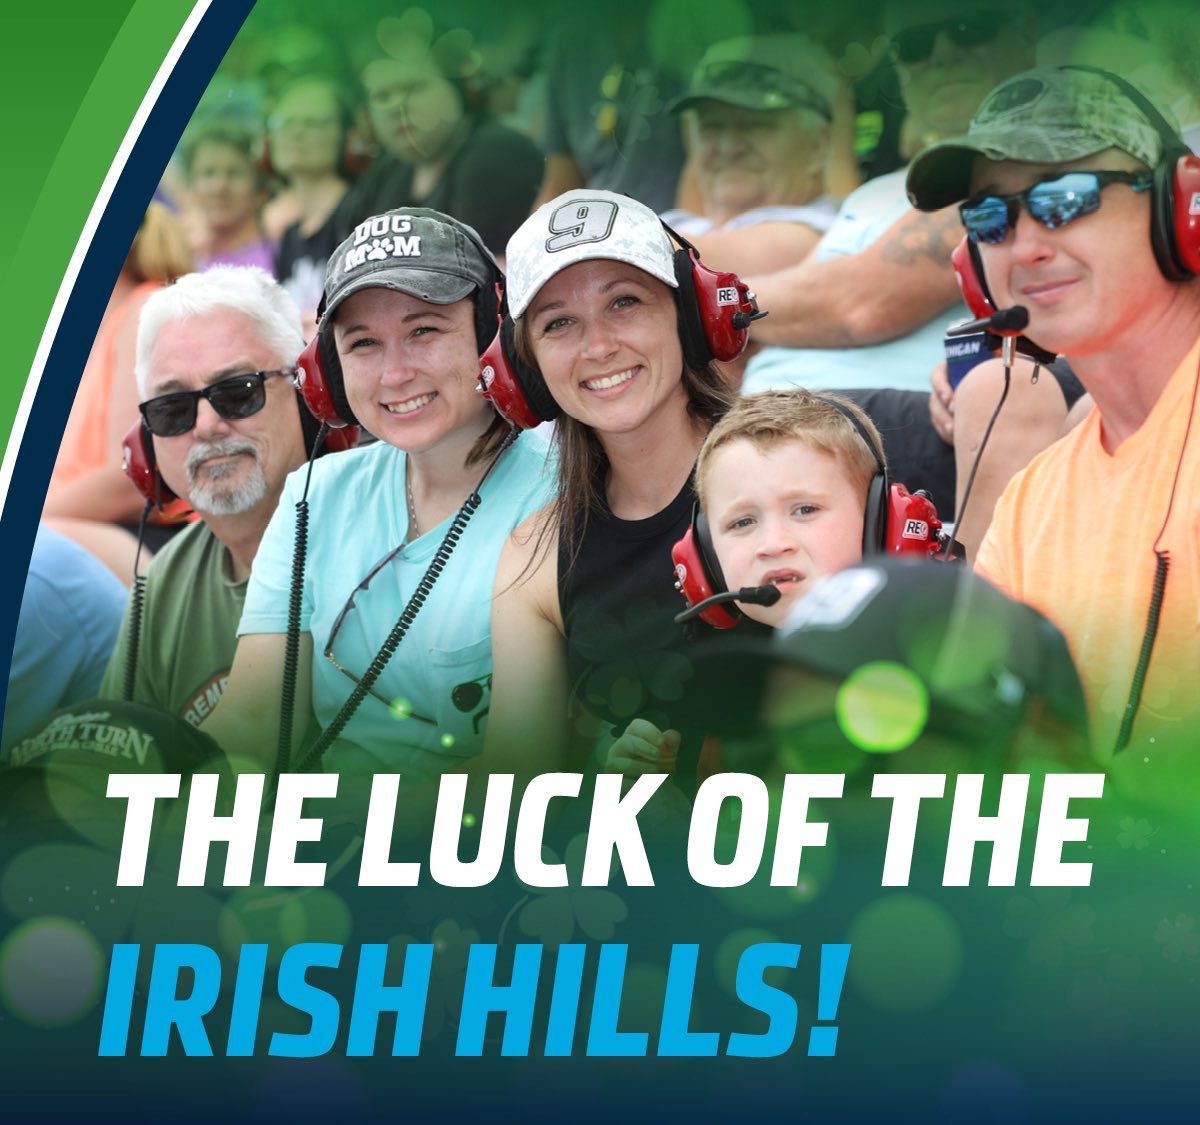 Sending you all a Happy St. Patrick’s Day from the Irish Hills! 💚🍀